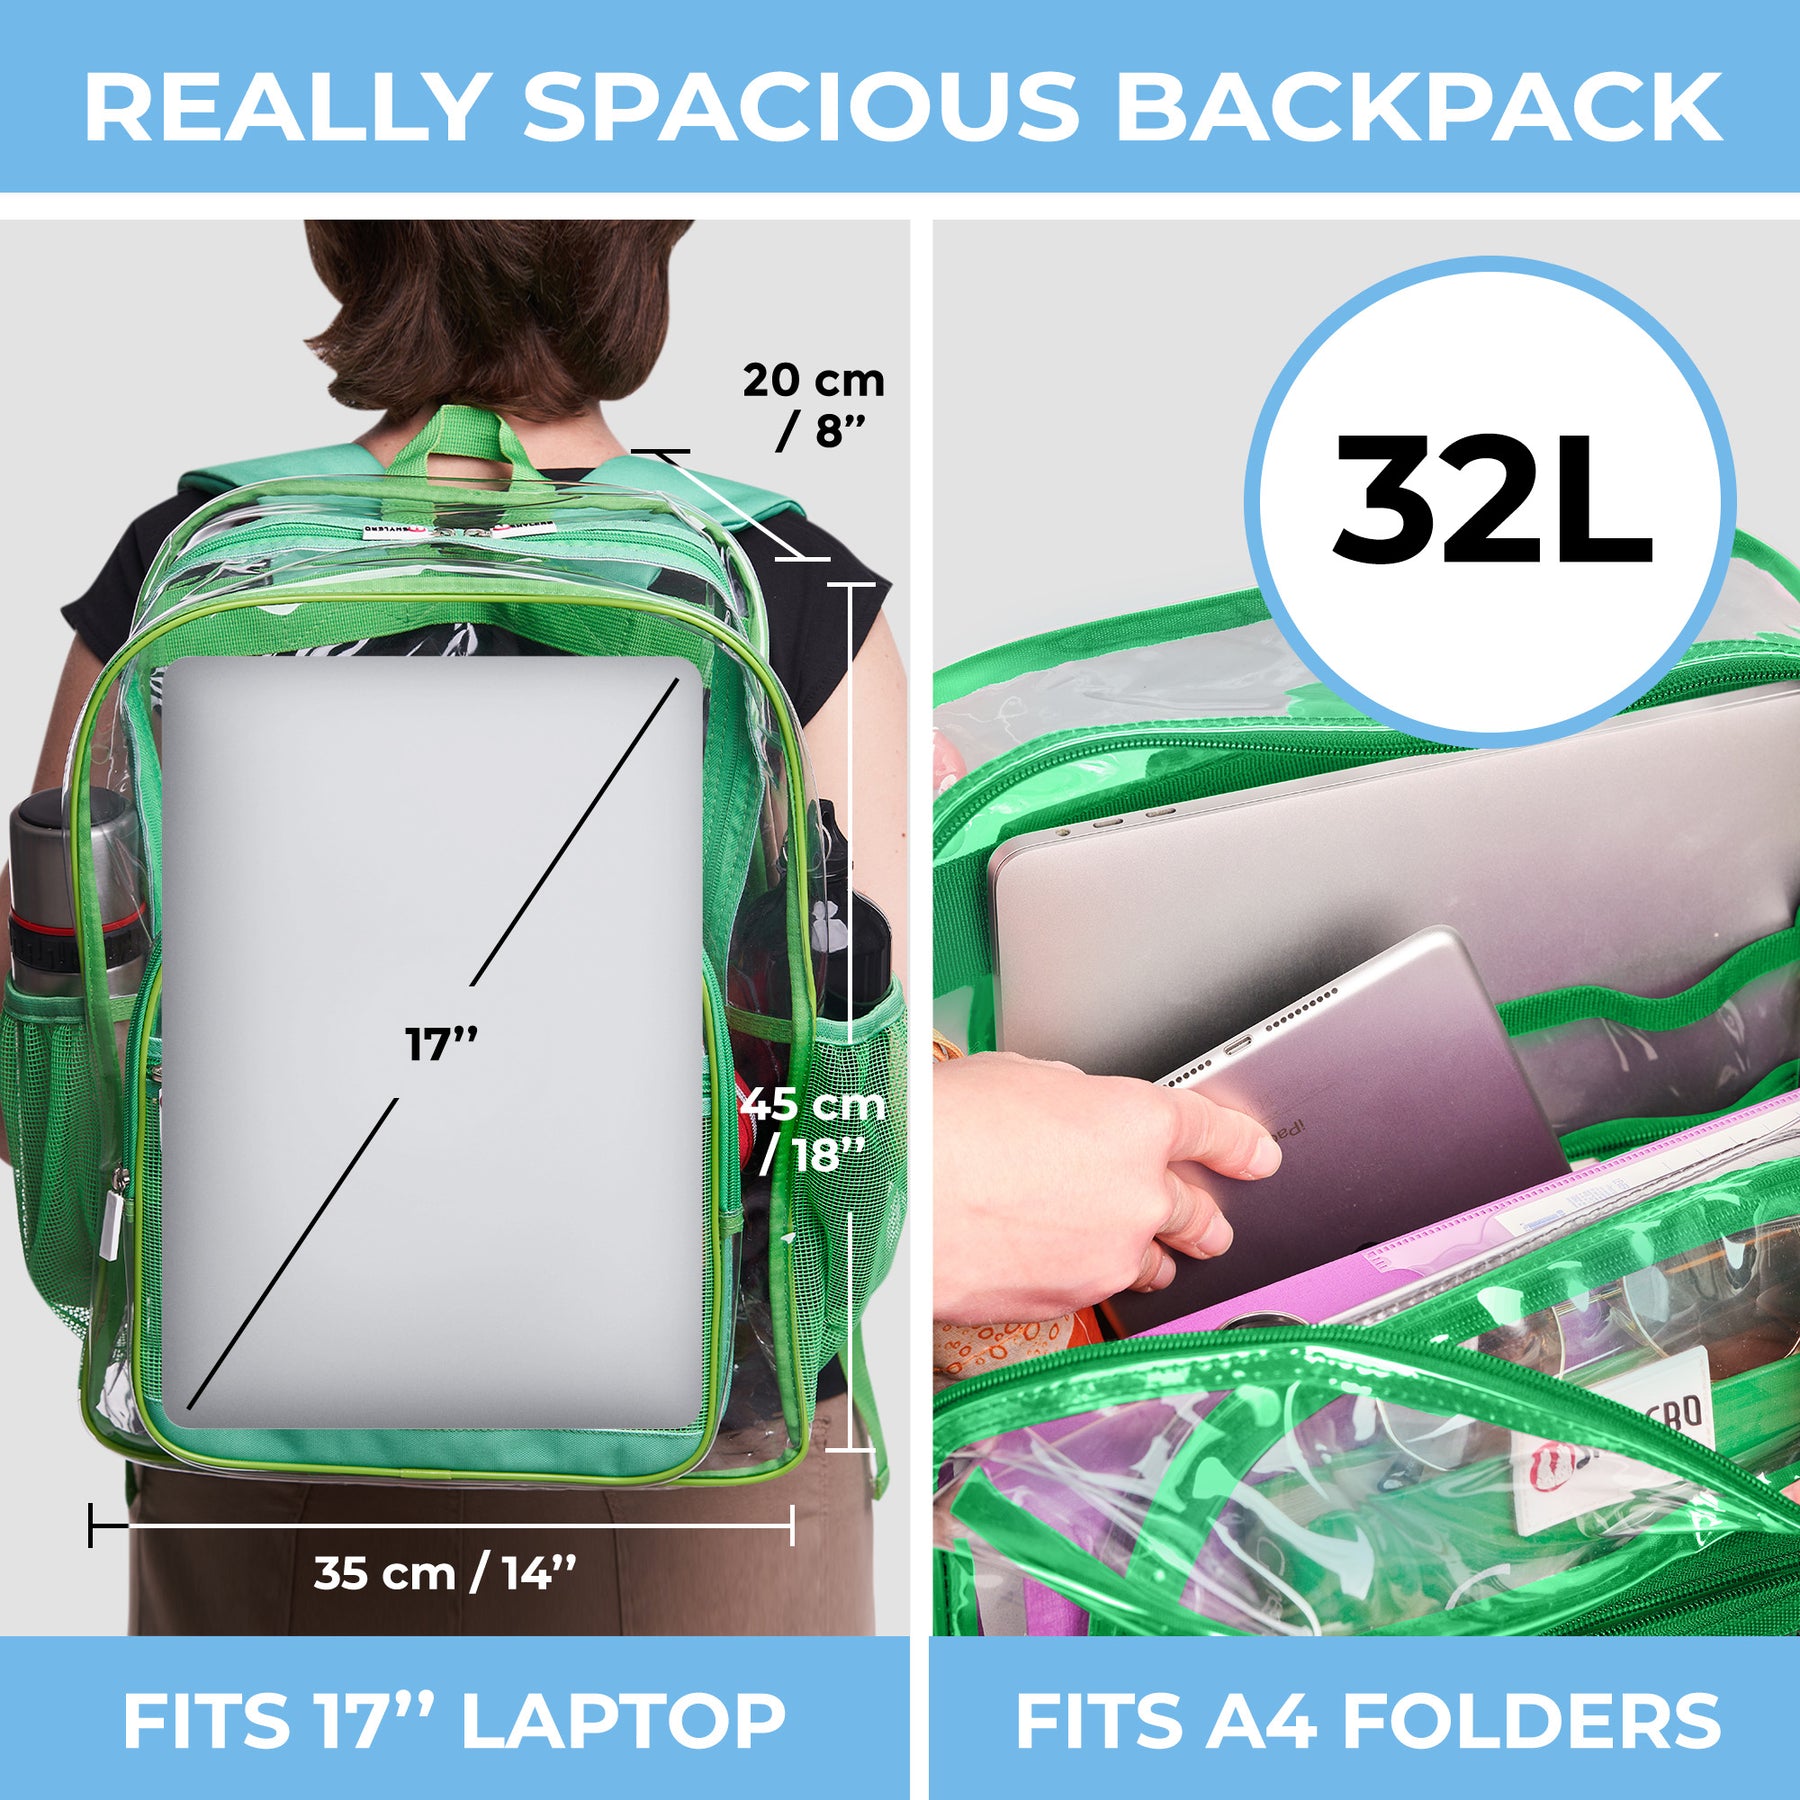 Clear Backpack For Work and School Backpack XL | TSA Lock | H18" x W14" x D8" (45cm x 35cm x 20cm) | 31.5 L | Green Rhino